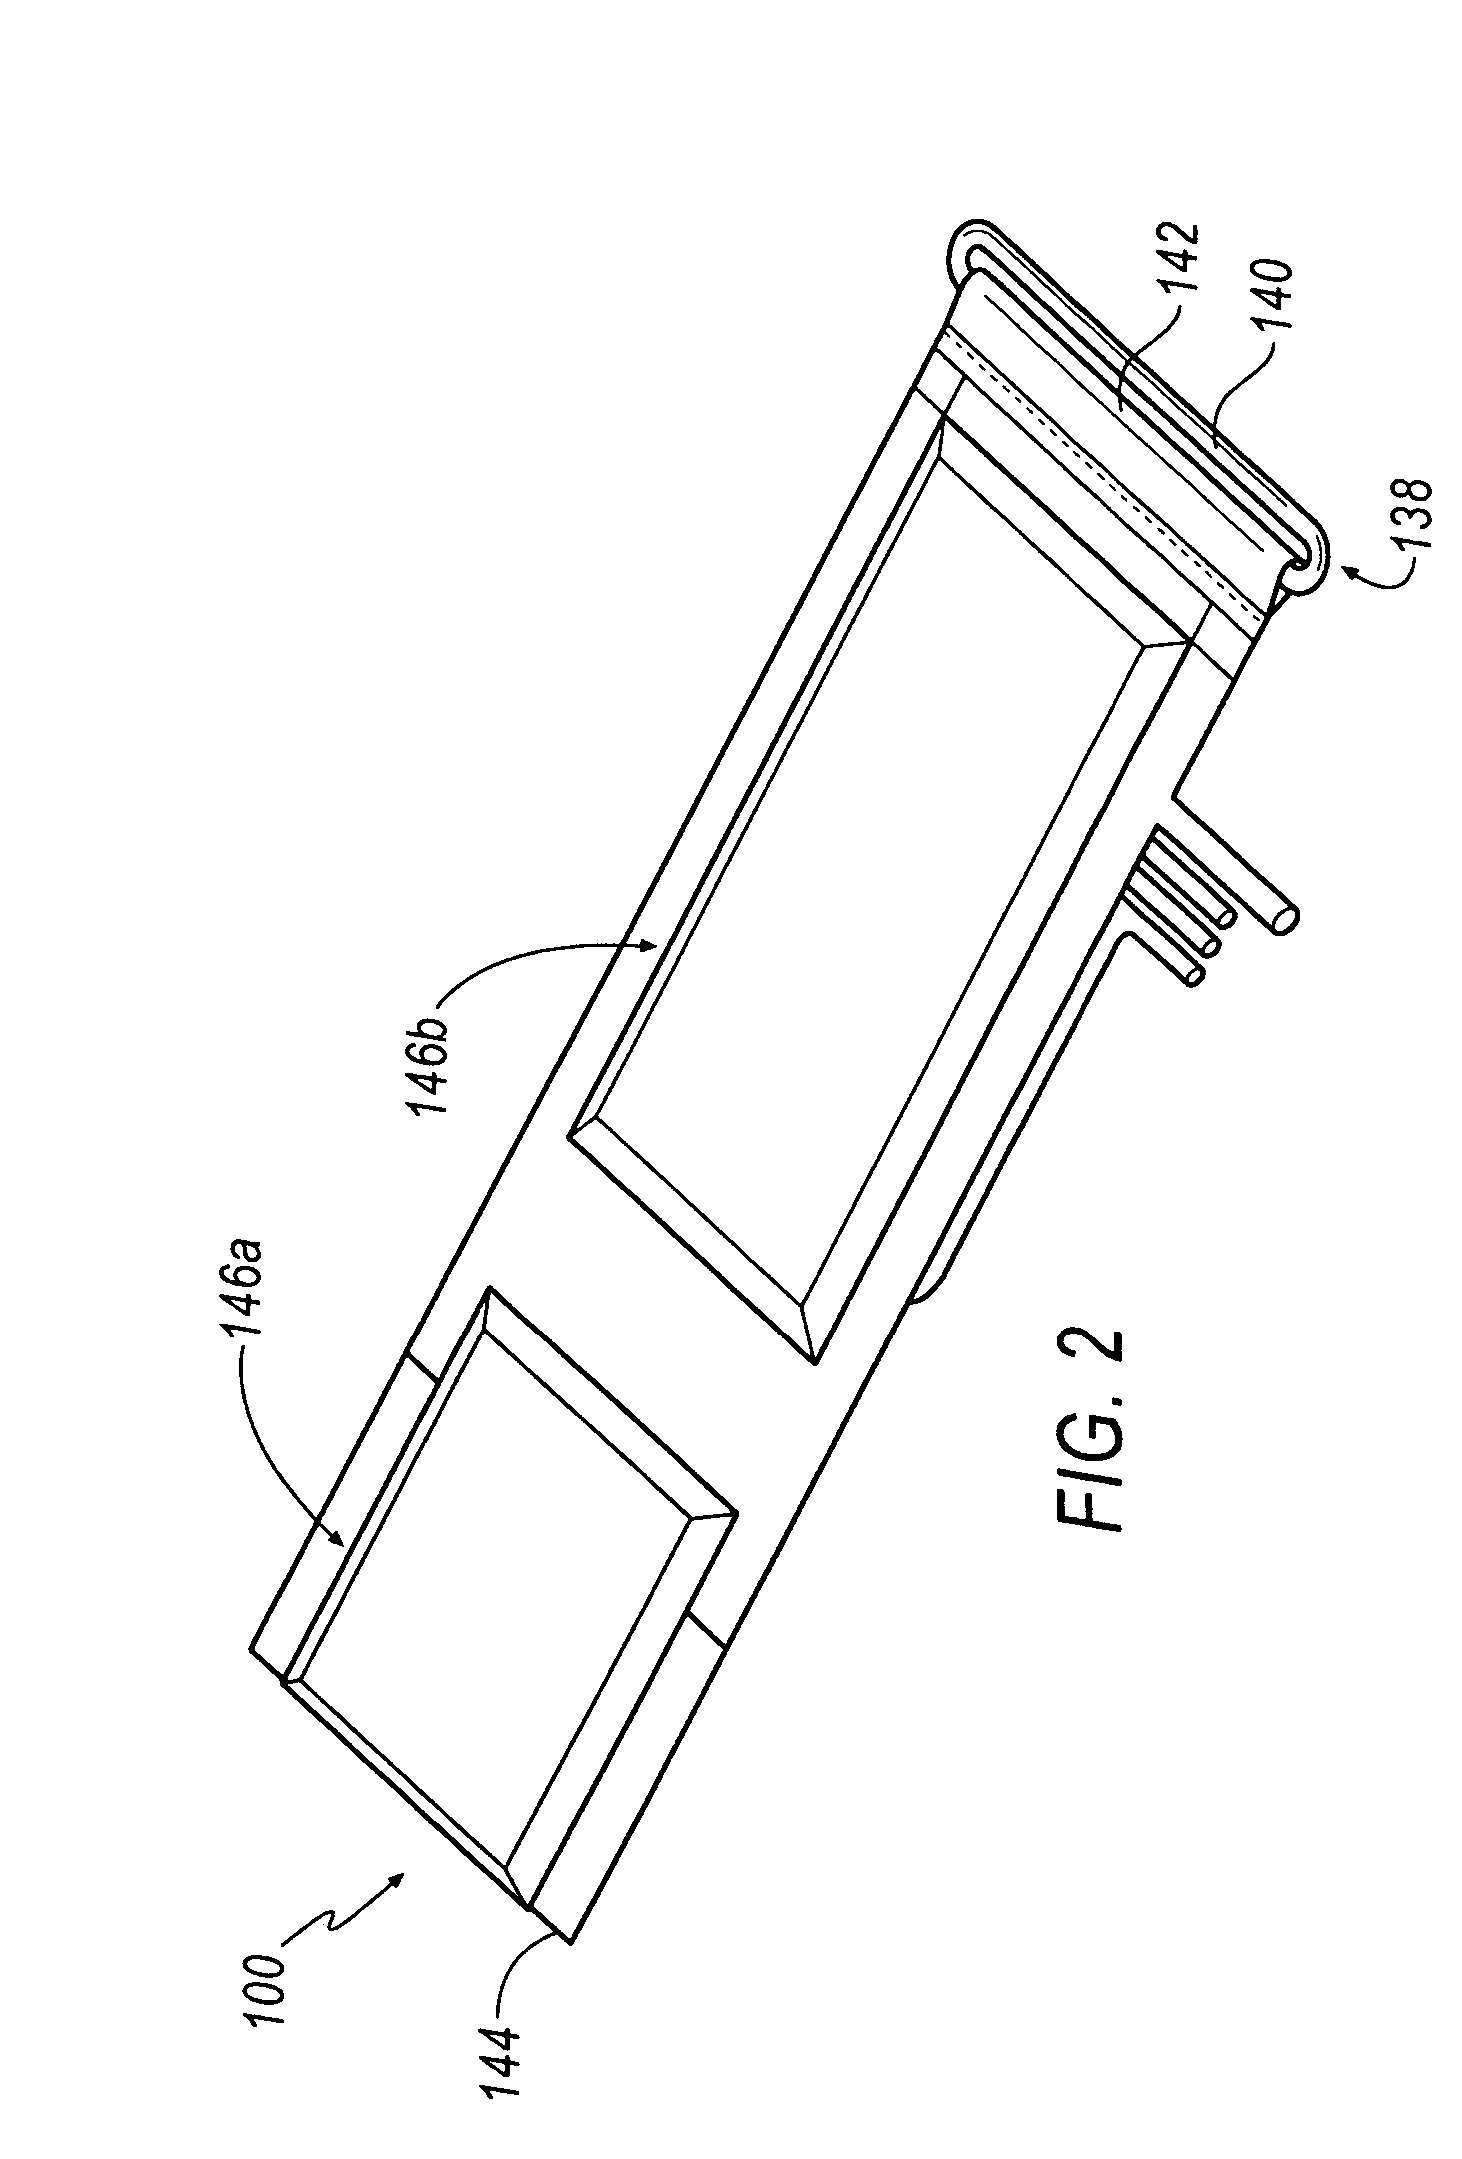 Apparatuses and methods for non-invasively monitoring blood parameters